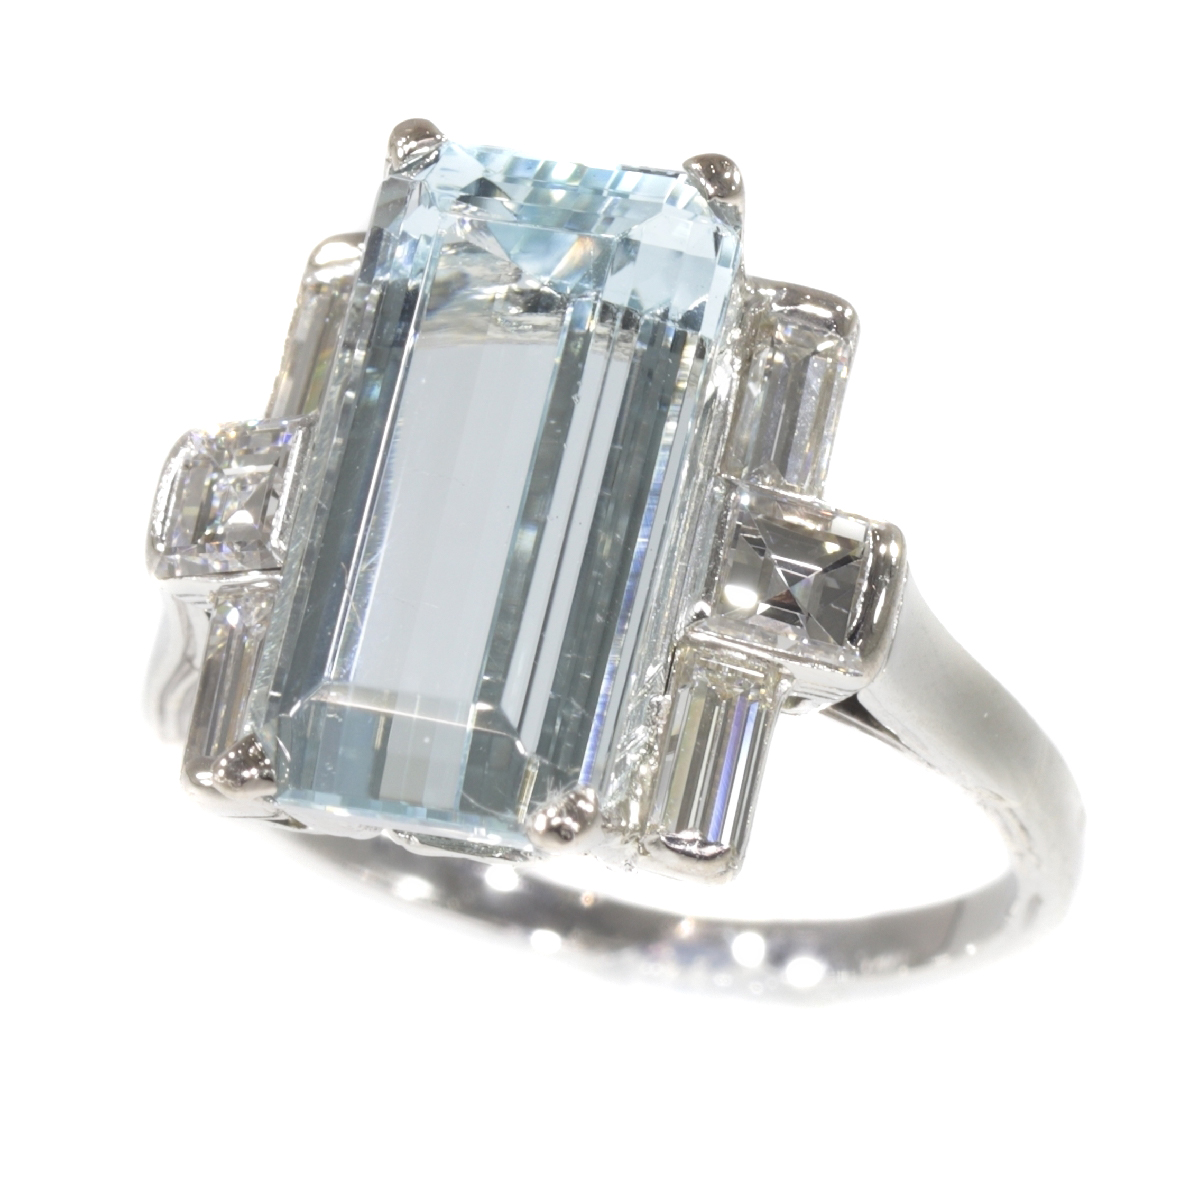 Vintage Fifties design white gold ring with aquamarine and diamonds